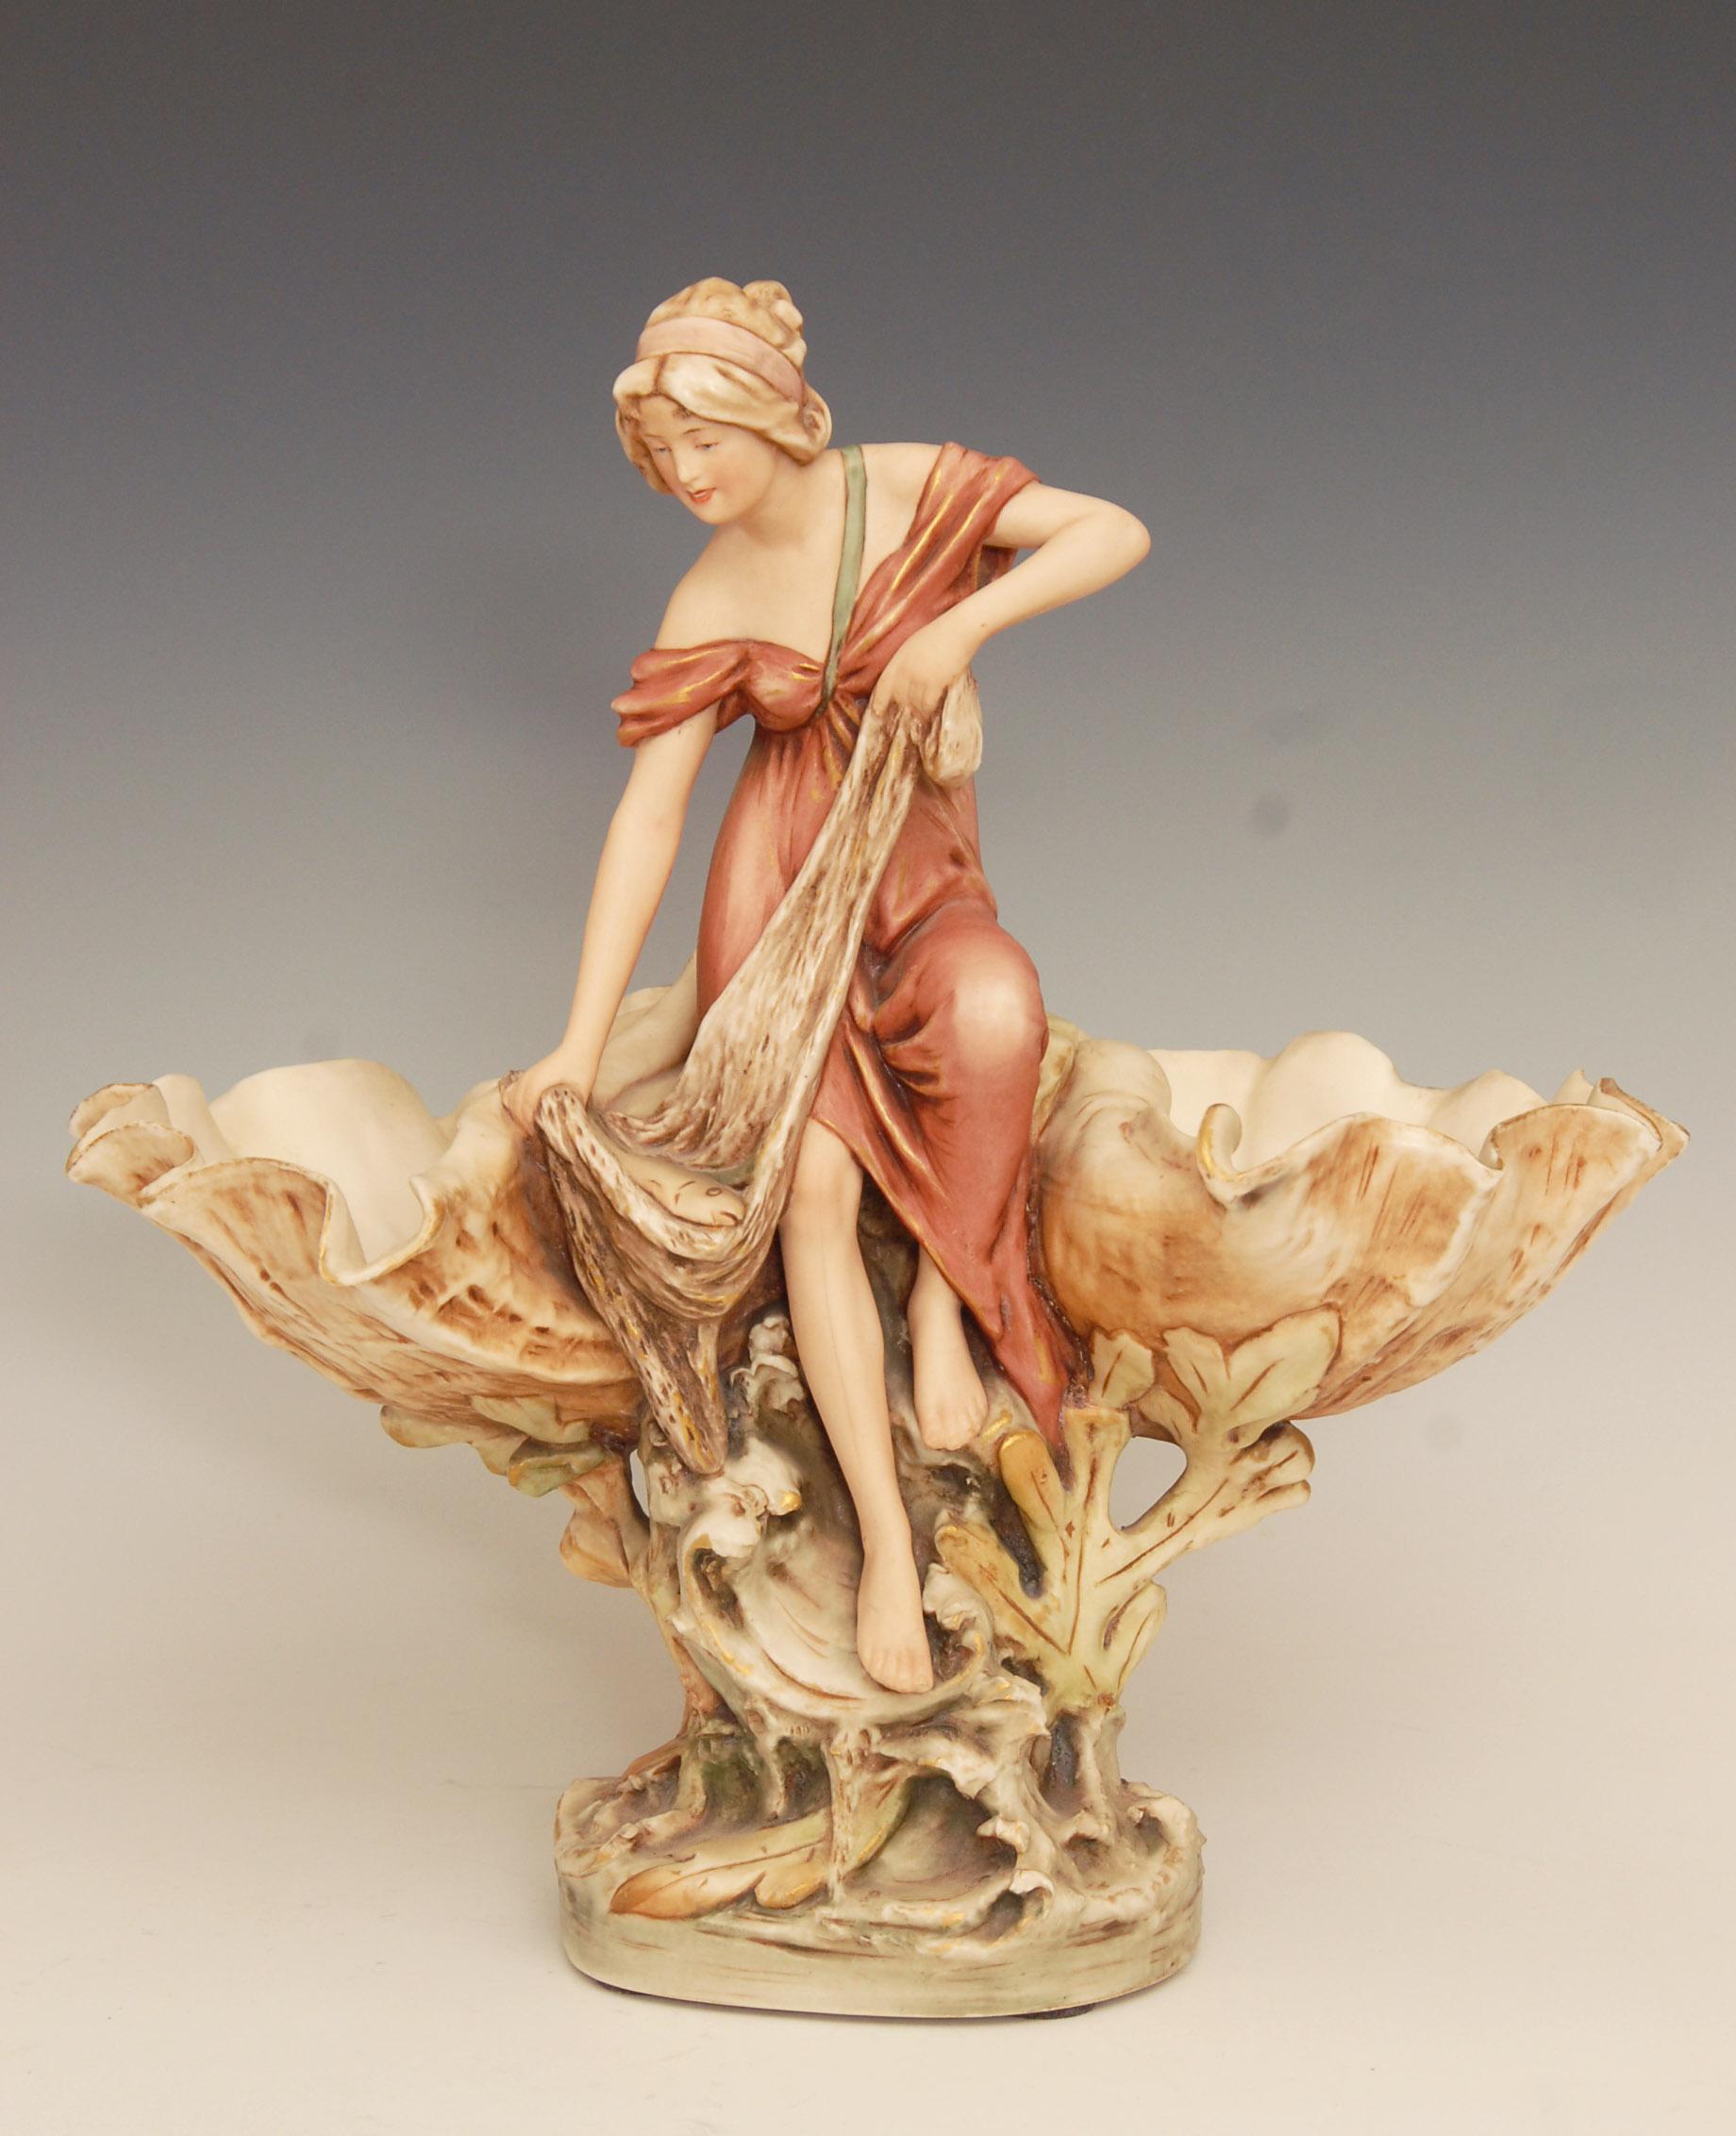 Lovely Art Nouveau Royal Dux porcelain double comport / centerpiece.
Model number 1125 depicting a fisherwoman that has caught a fish in her net, flanked by two giant clam shells. Designed by Alois Hampel, circa 1910.

Measures: 14 inches high.